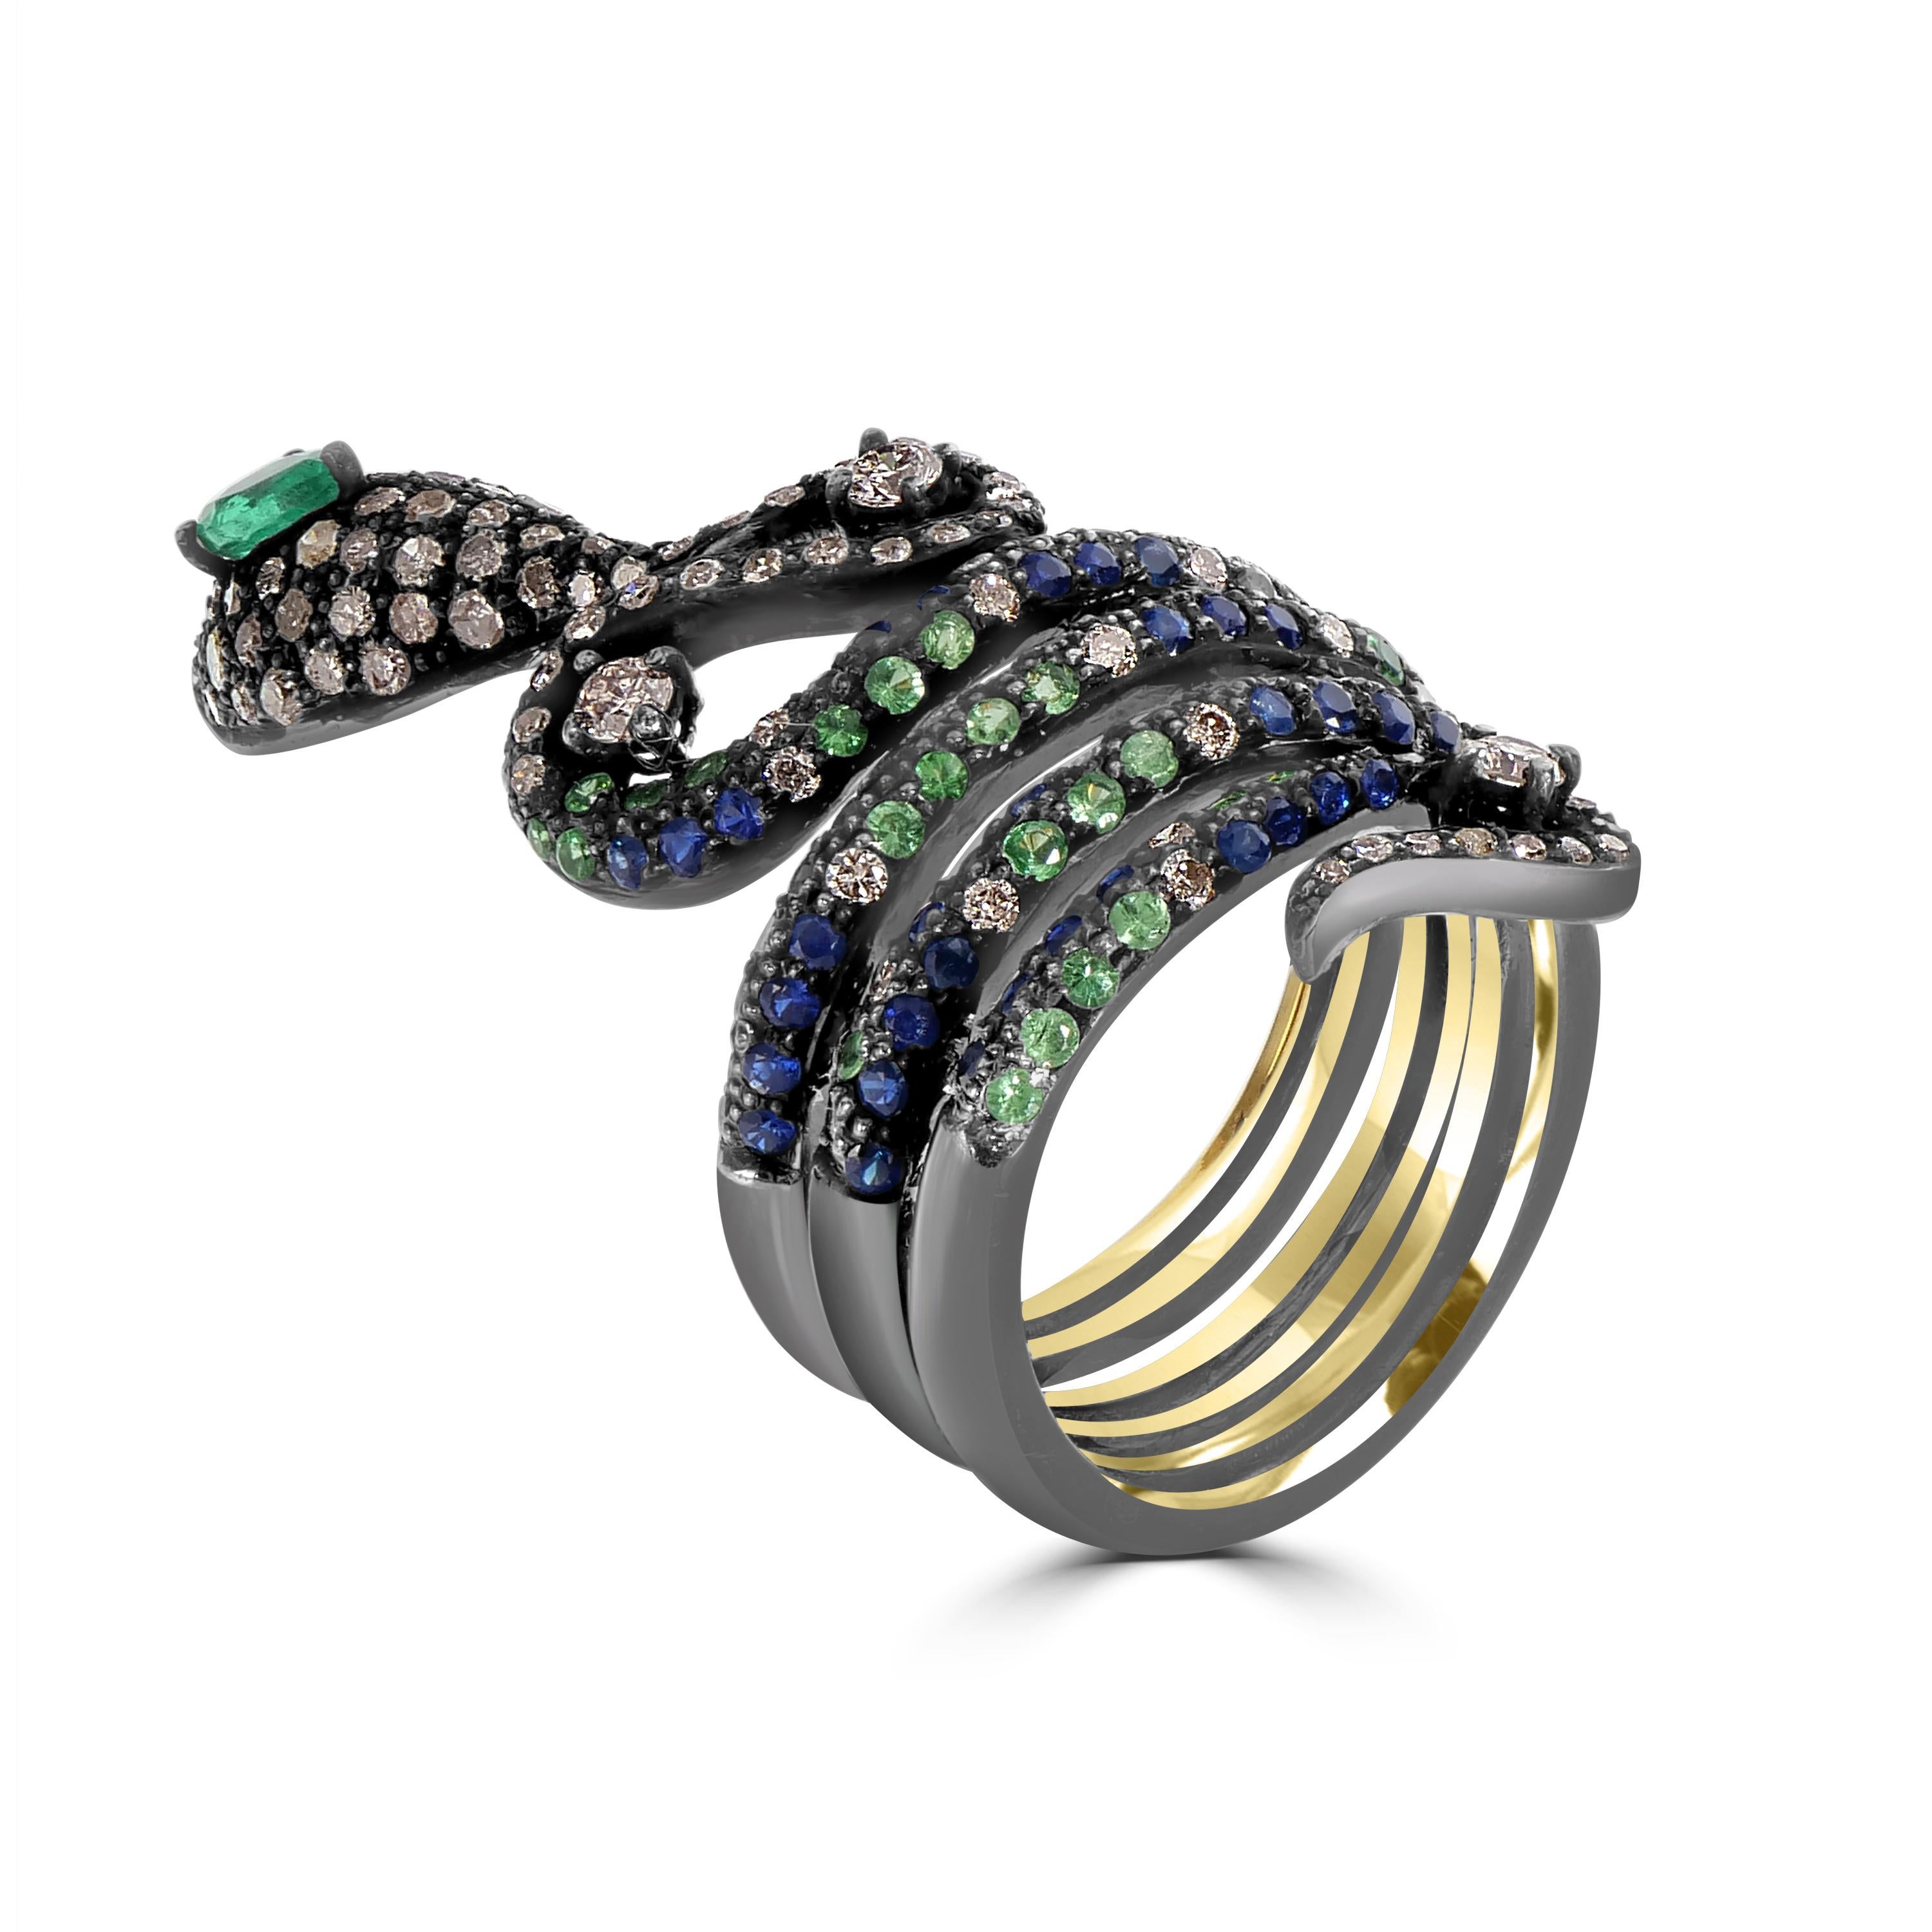 Discover the allure of the Victorian Multi Gemstone and Diamond Serpentine Band Ring — a stackable masterpiece in 18k Gold and black rhodium silver that seamlessly blends historical charm with contemporary elegance.

At the helm of this ring is a